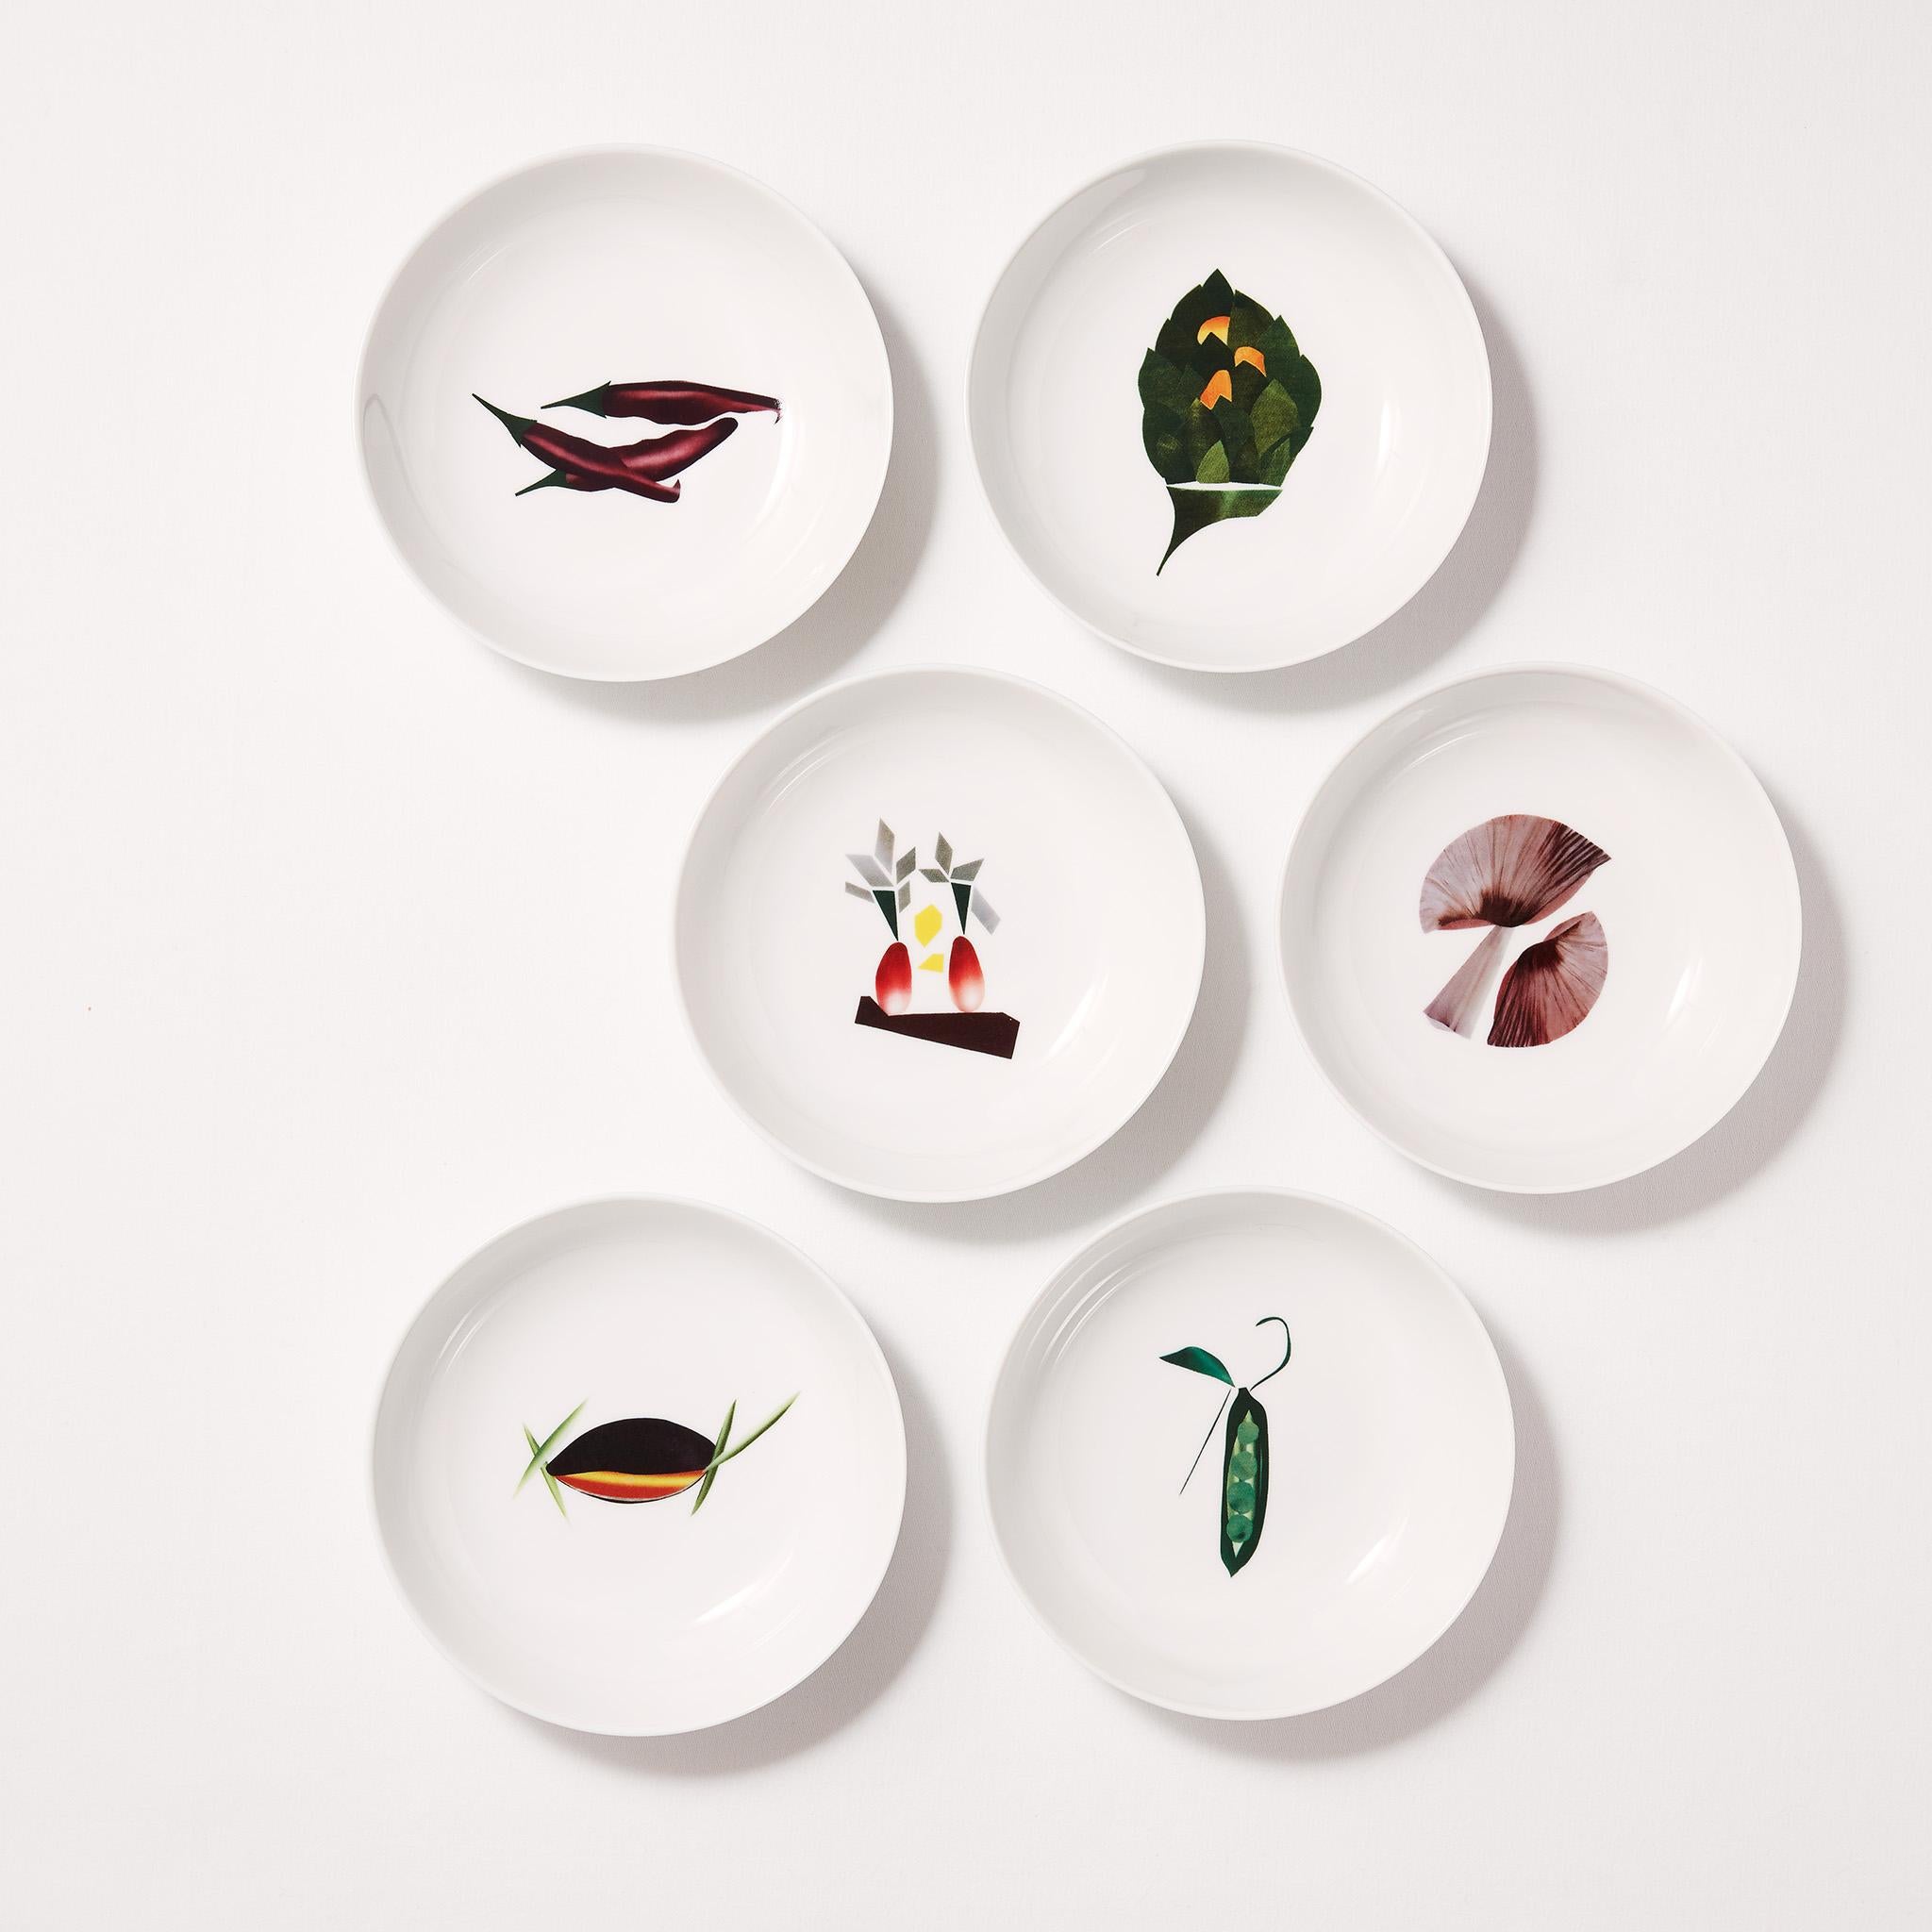 Box gift of 6 small bowls with the silk-screened creations of the paper collages of the French Chef Alain Passard. A creation inspired by his recipes of orange artichoke, chocolate pepper, peas with sorrel, bouchot mold with nasturtium flower and